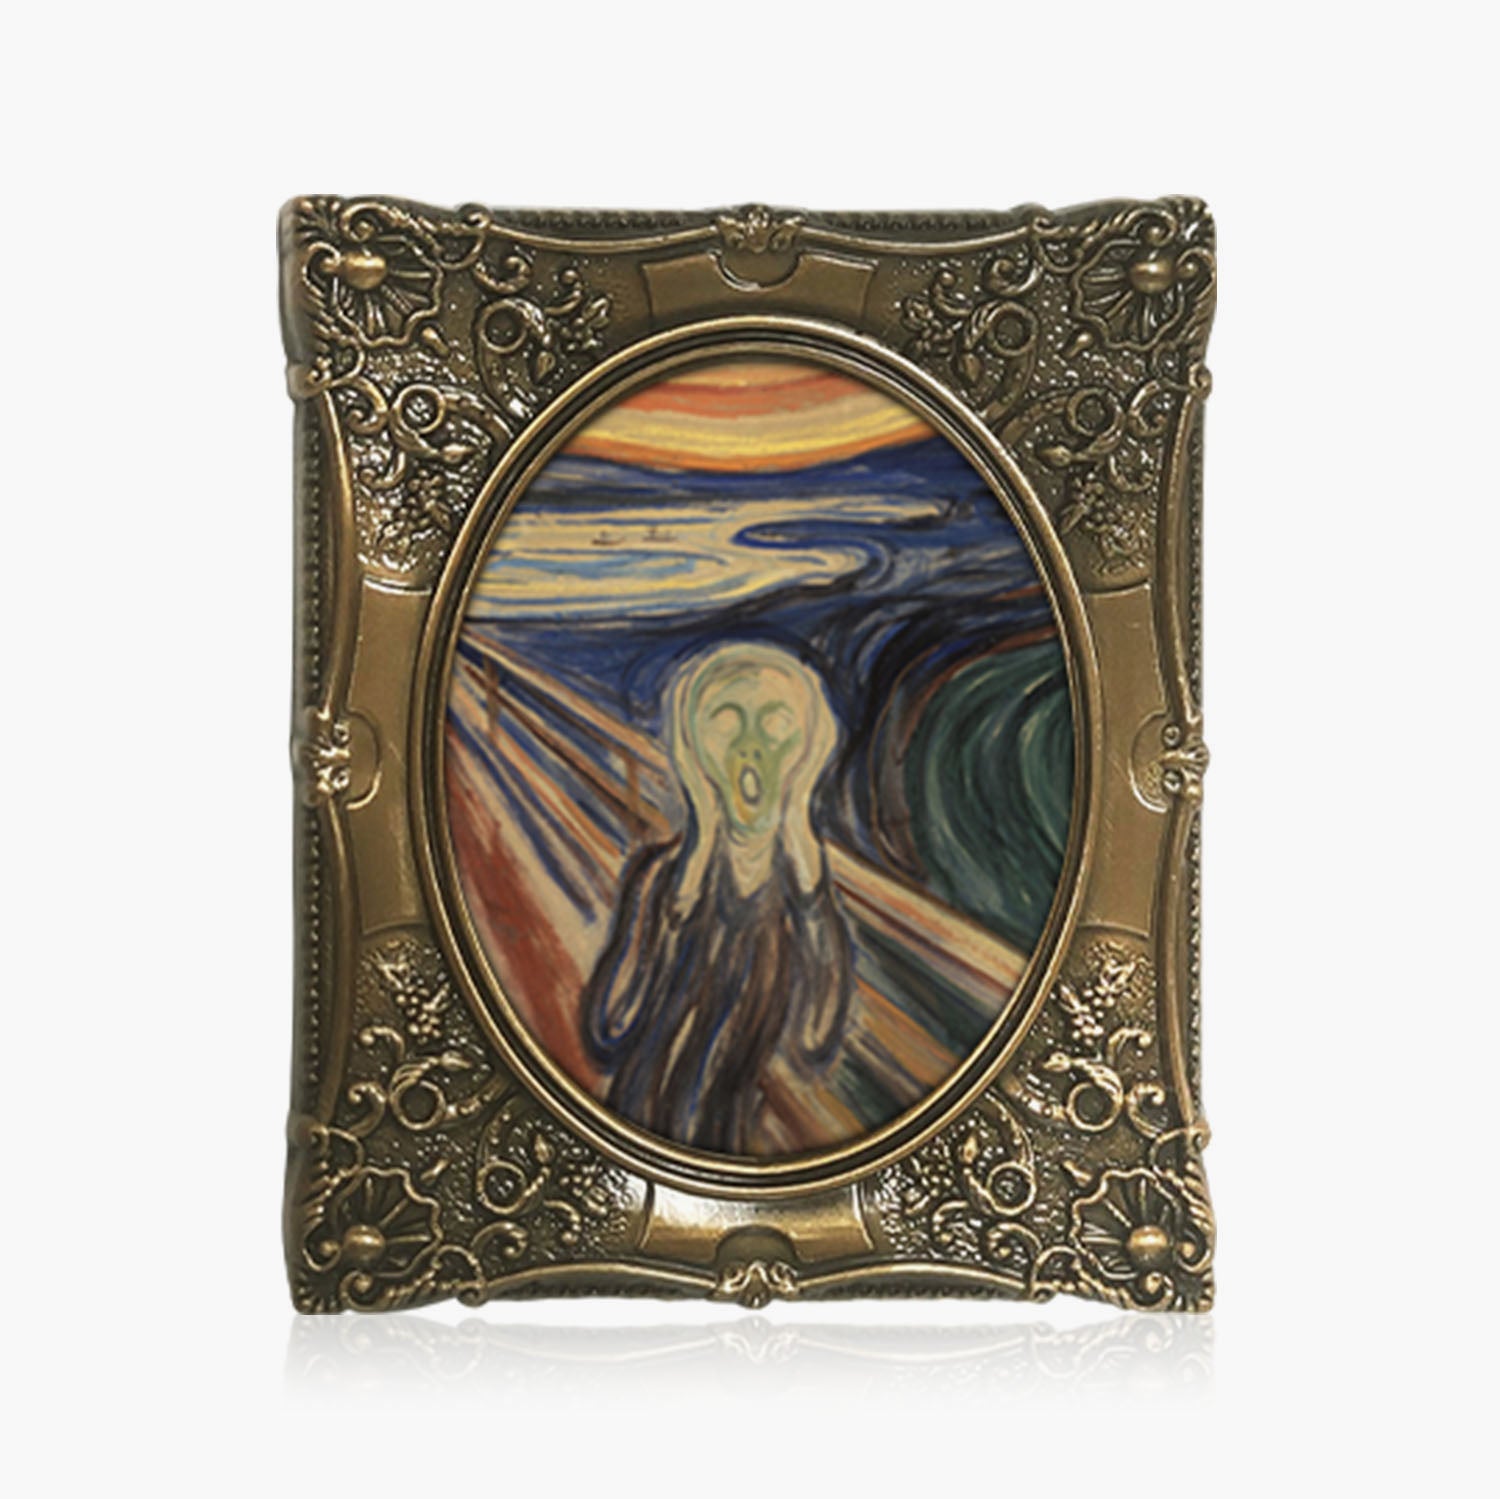 The Most Famous Paintings - Edvard Munch - The Scream